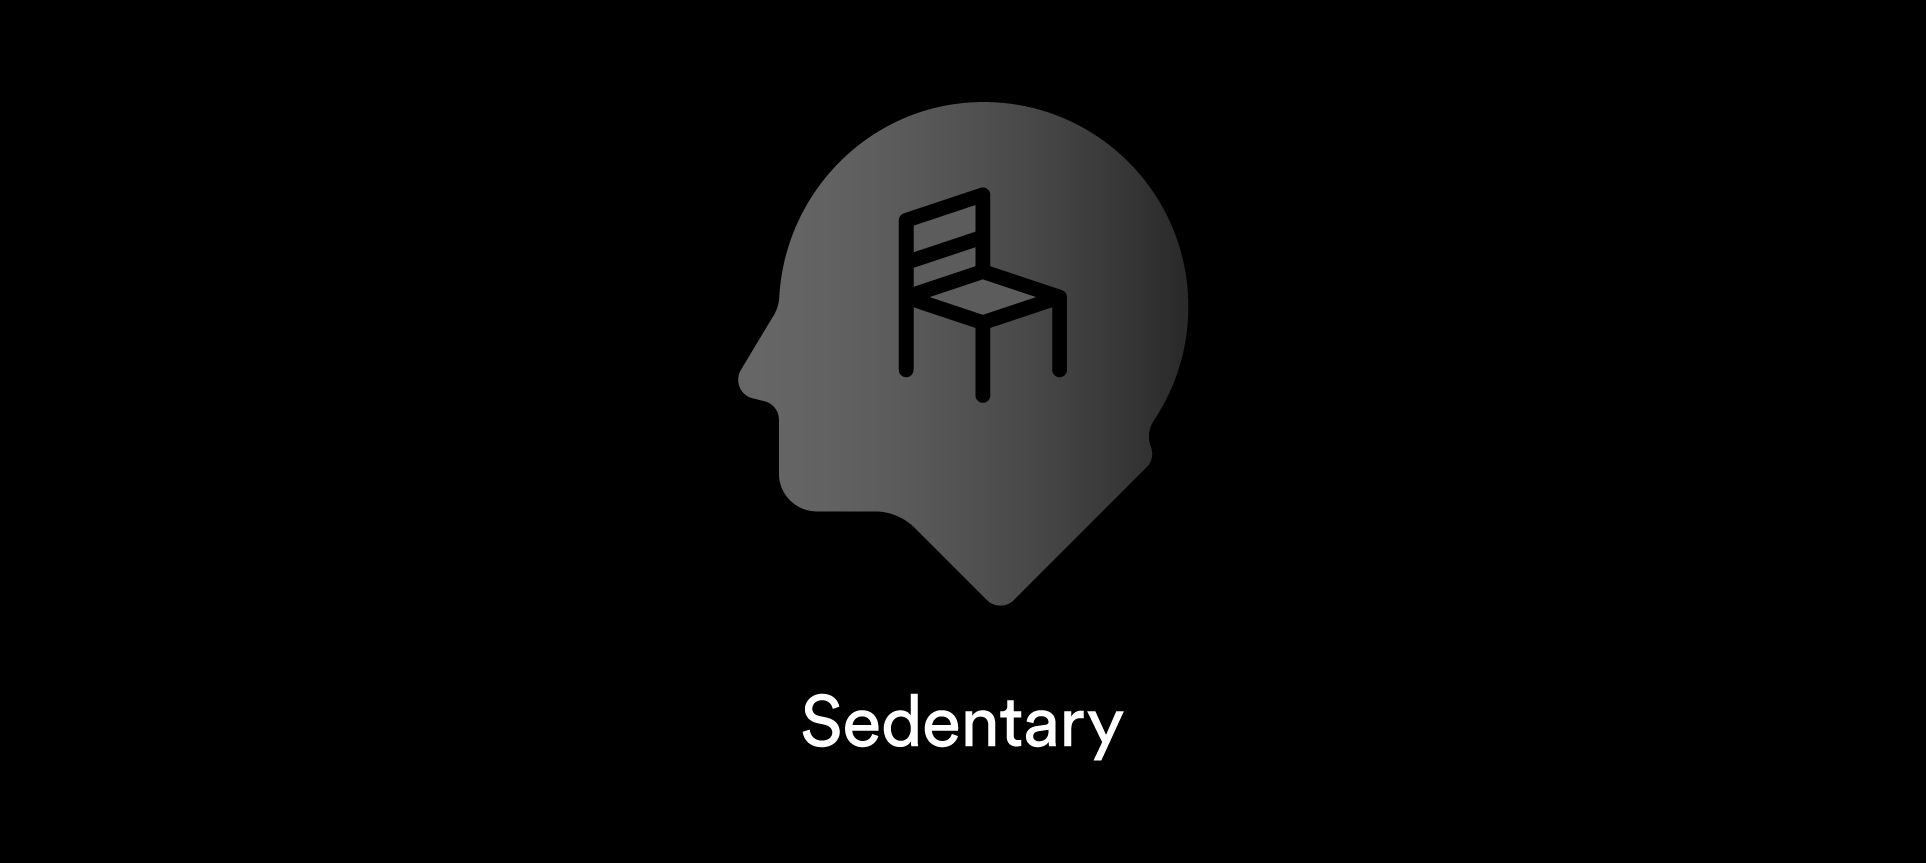 Head with chair icon and 'Sedentary' underneath it